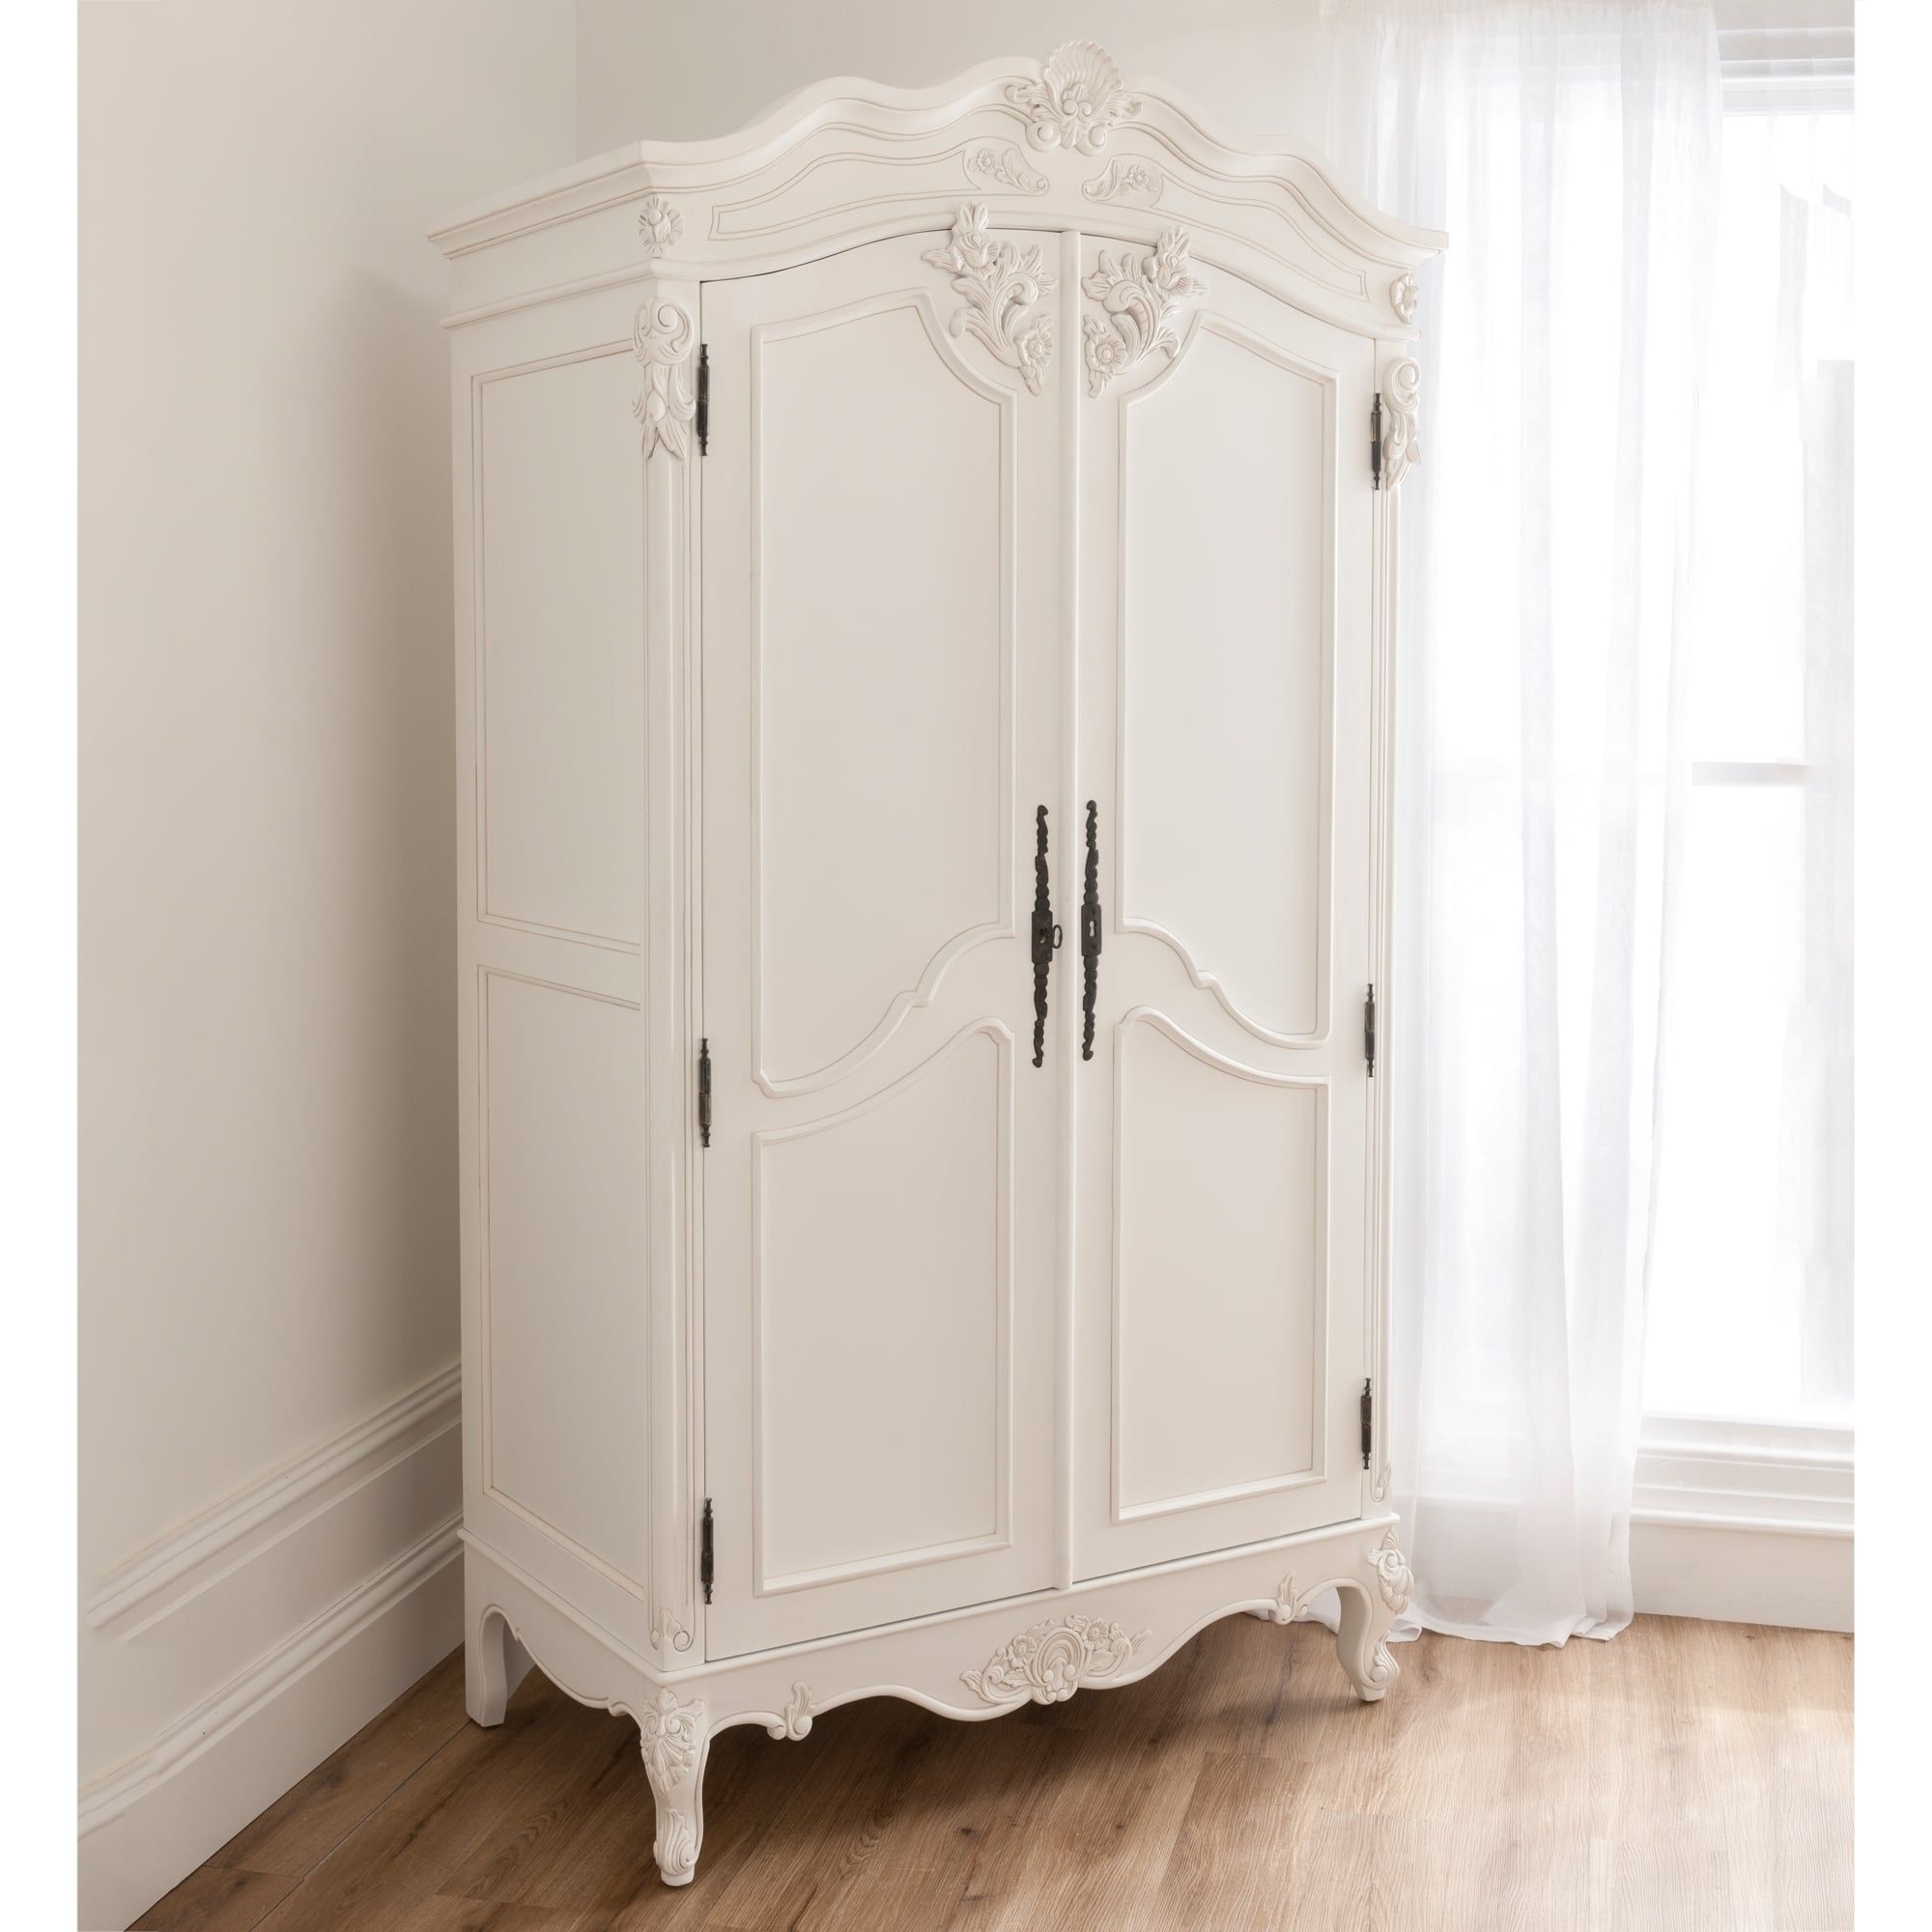 Baroque Antique French Wardrobe Is Available Online From Pertaining To Widely Used White French Style Wardrobes (View 1 of 15)